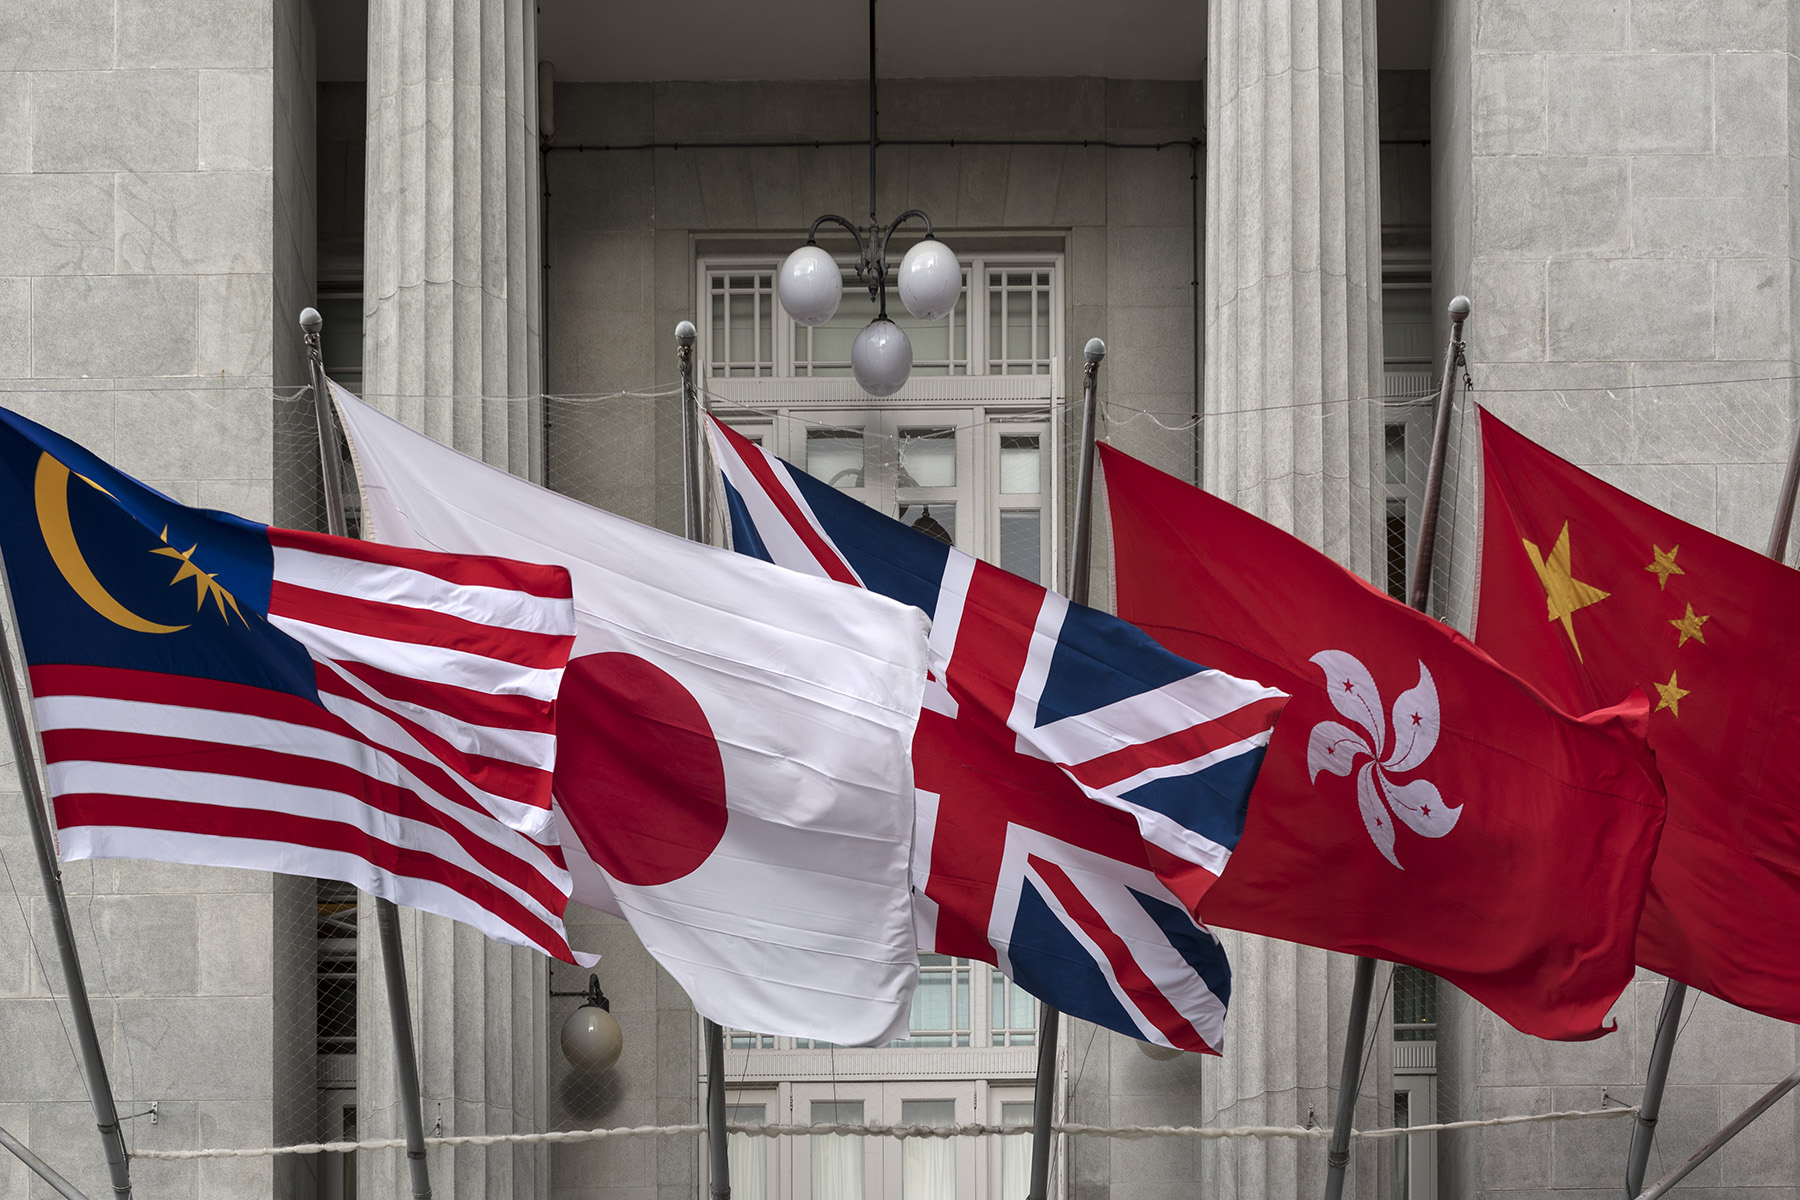 Row of flag poles outside a building with the flags of Malaysia, Japan, United Kingdom, Hong Kong and China